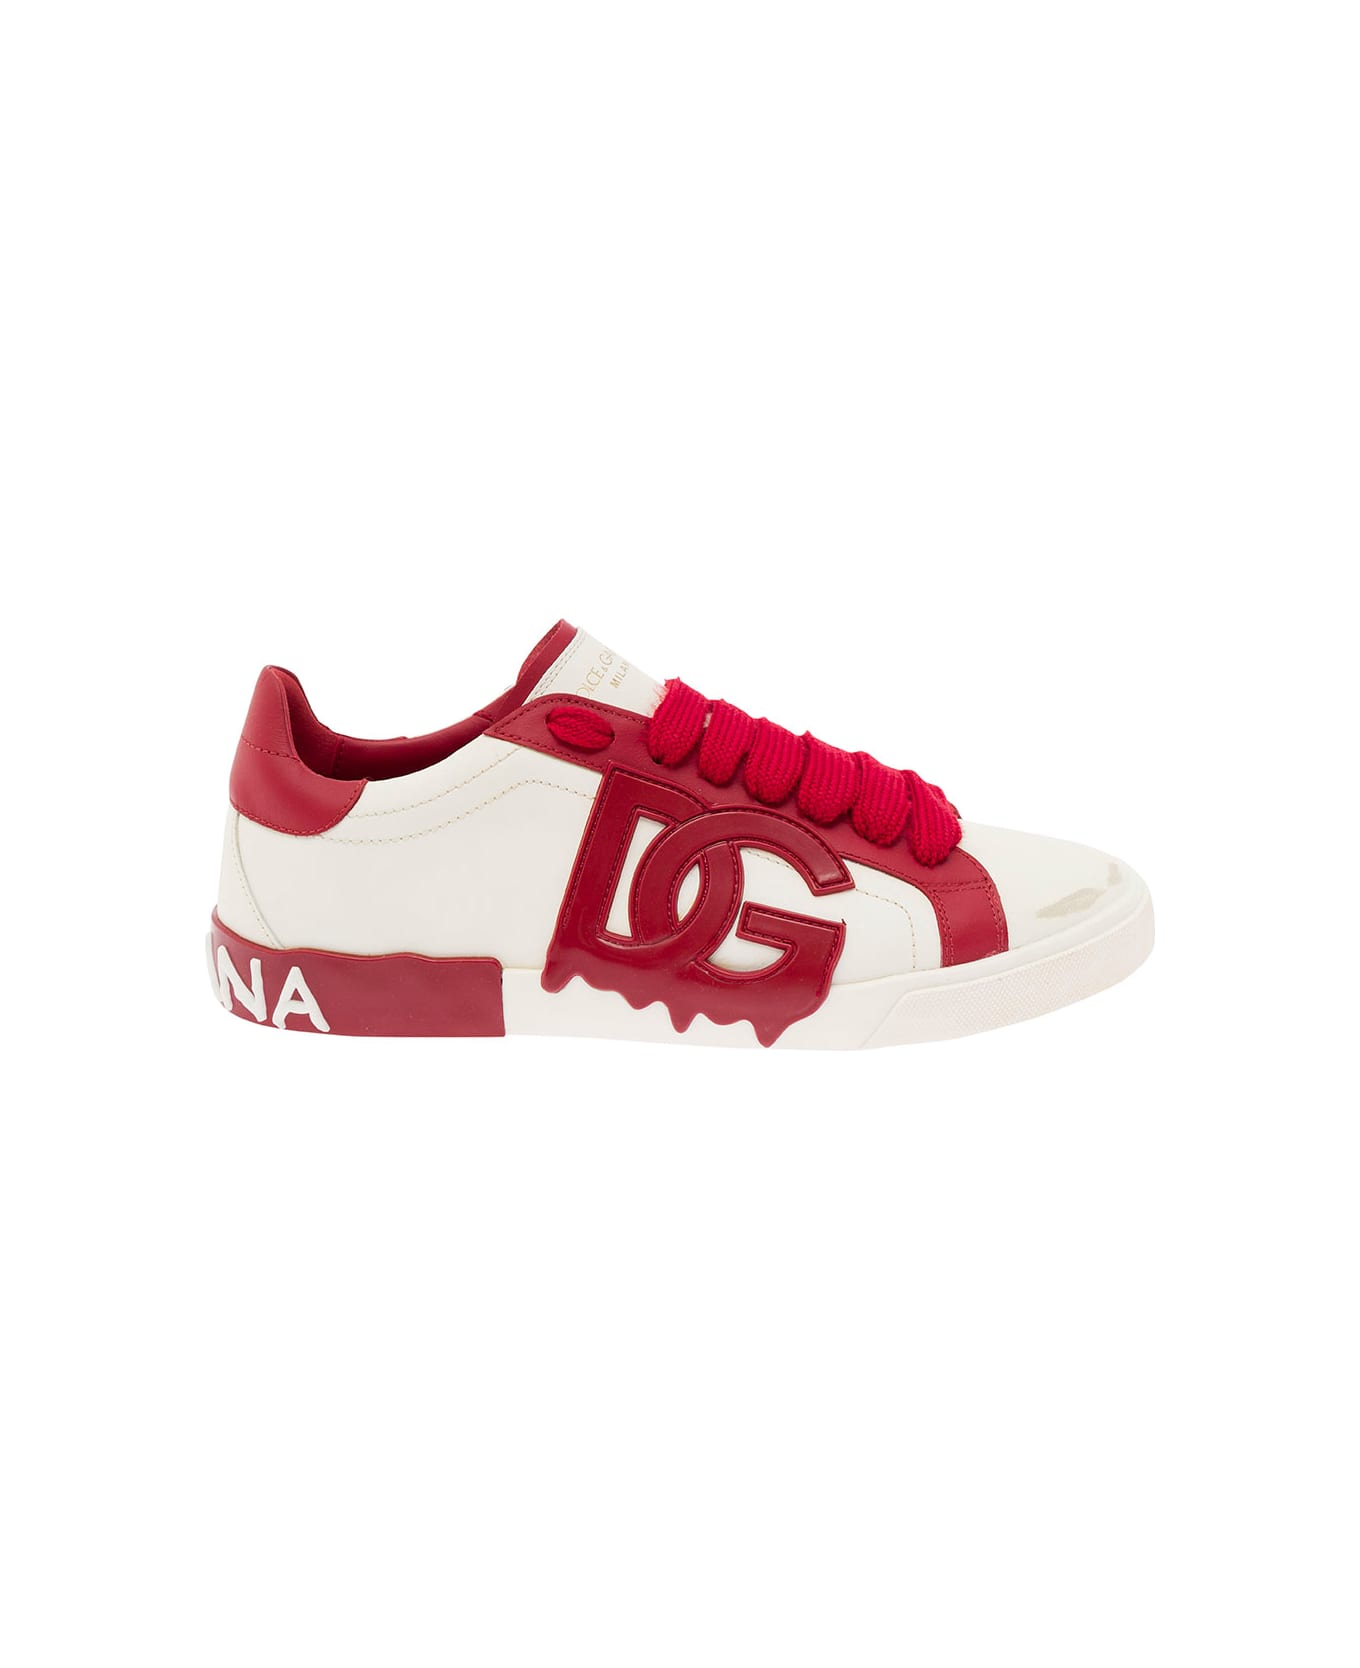 Dolce & Gabbana 'vintage Portafino' White And Red Low Top Sneakers With Dg Patch In Leather Man - Red